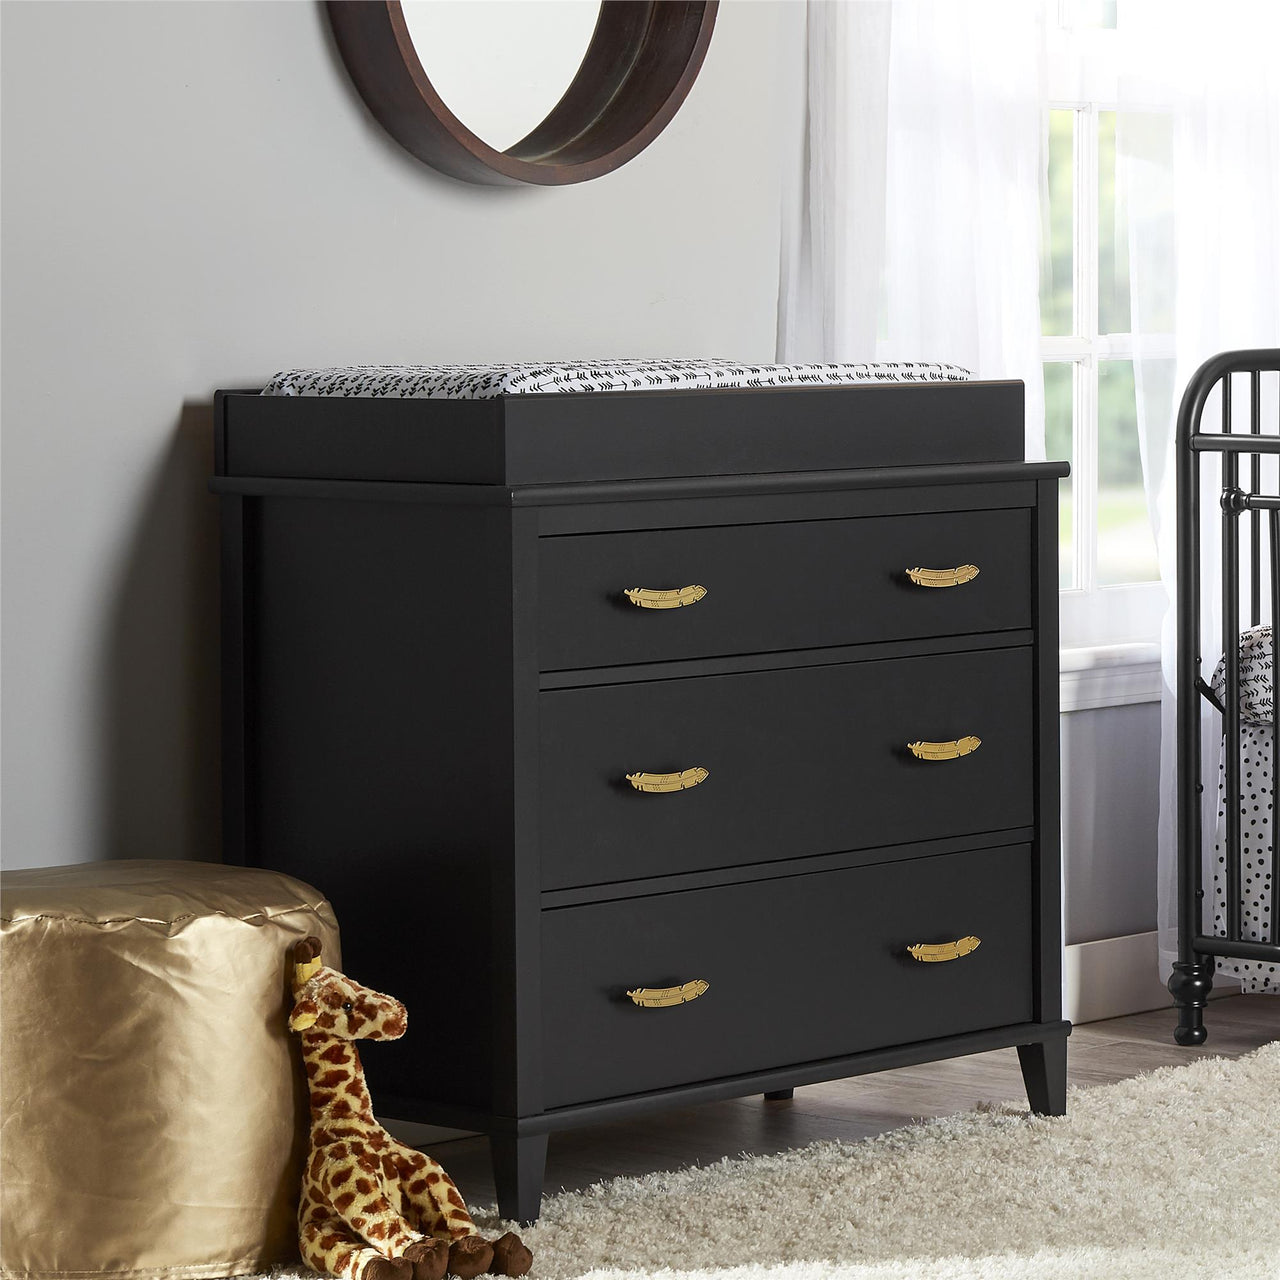 Monarch Hill Hawken 3 Drawer Changing Table - Black